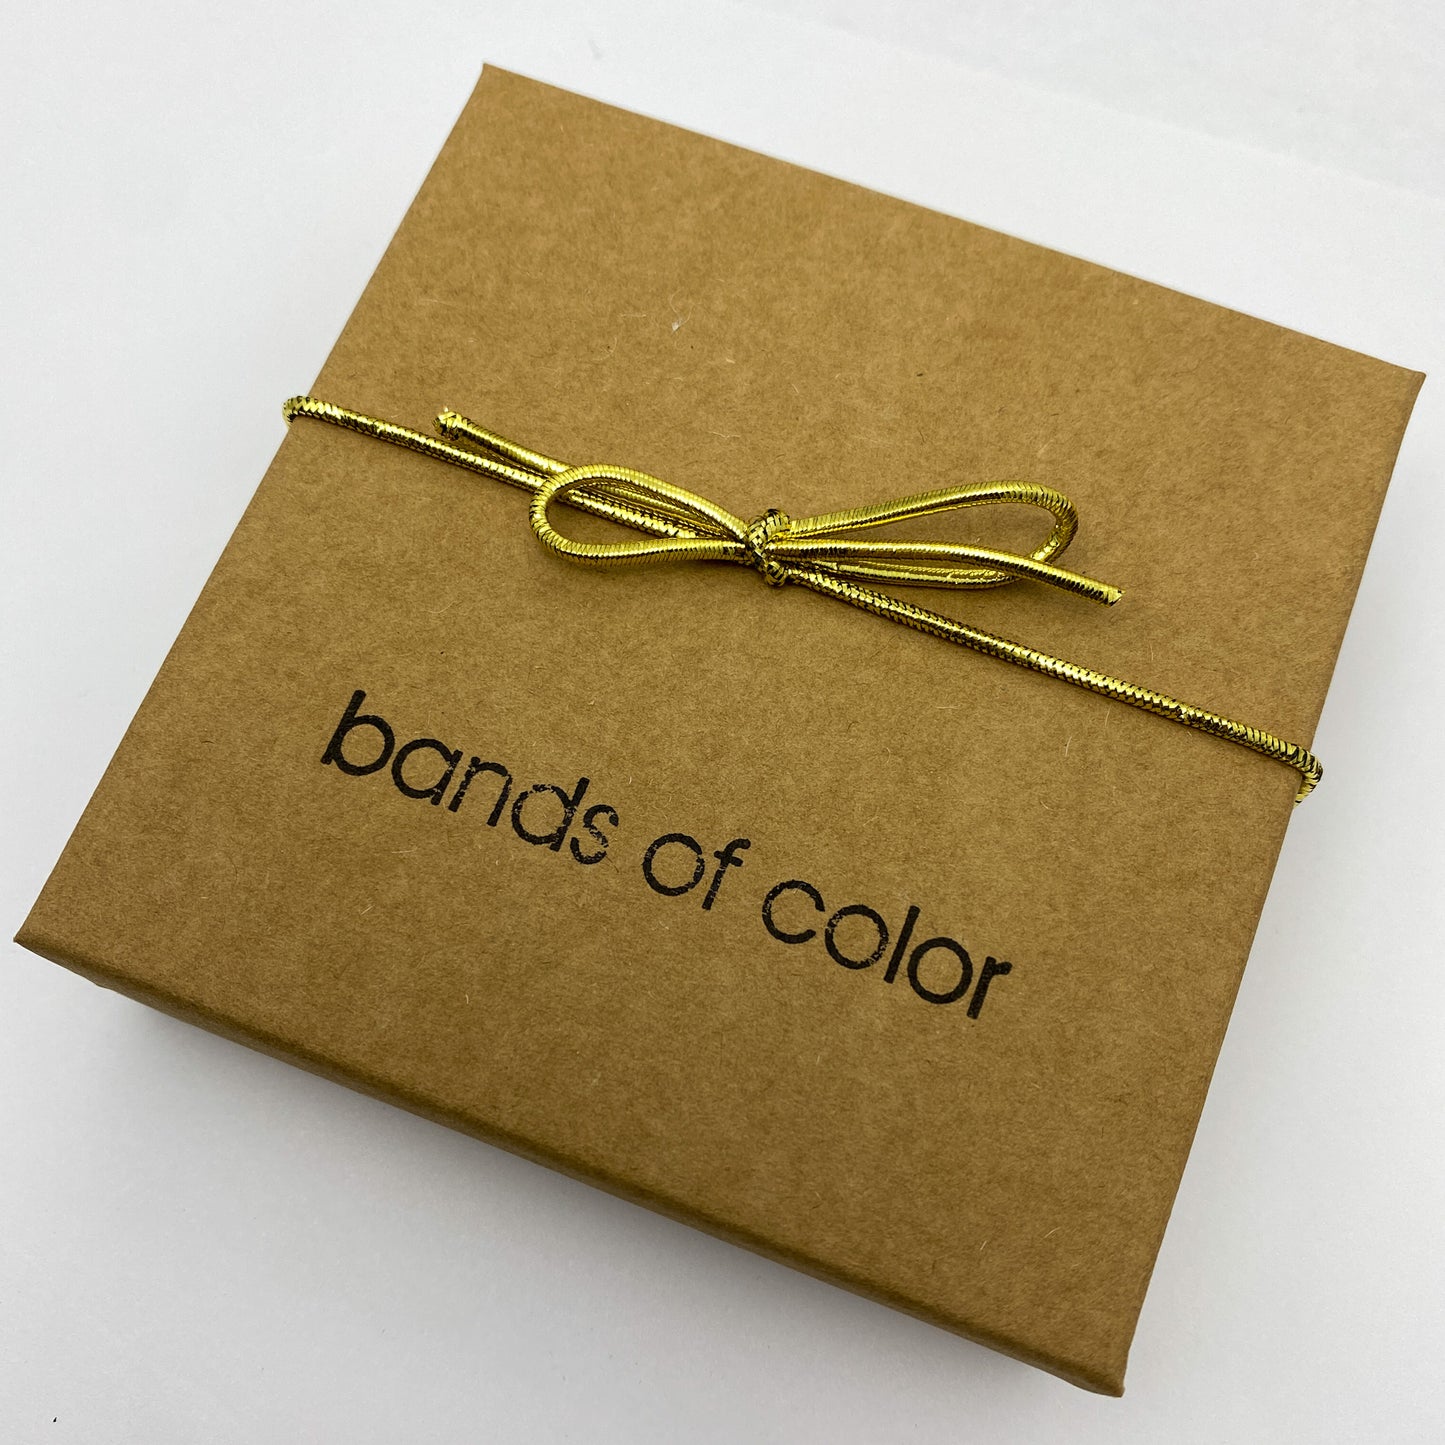 Bands of Color Gift Card